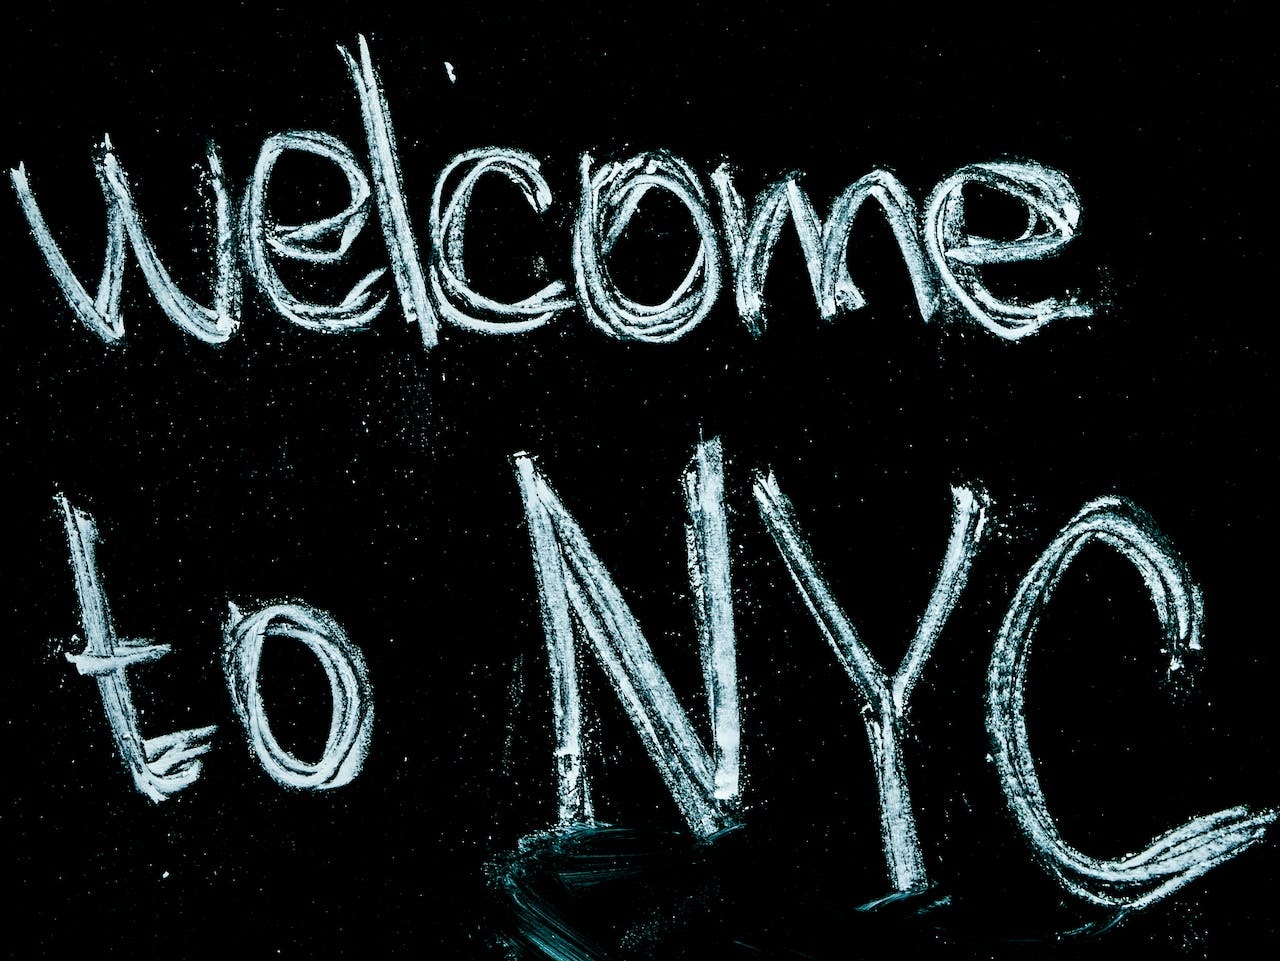 A handwritten ‘welcome to NYC’ sign in white chalk and thick lettering on a black background